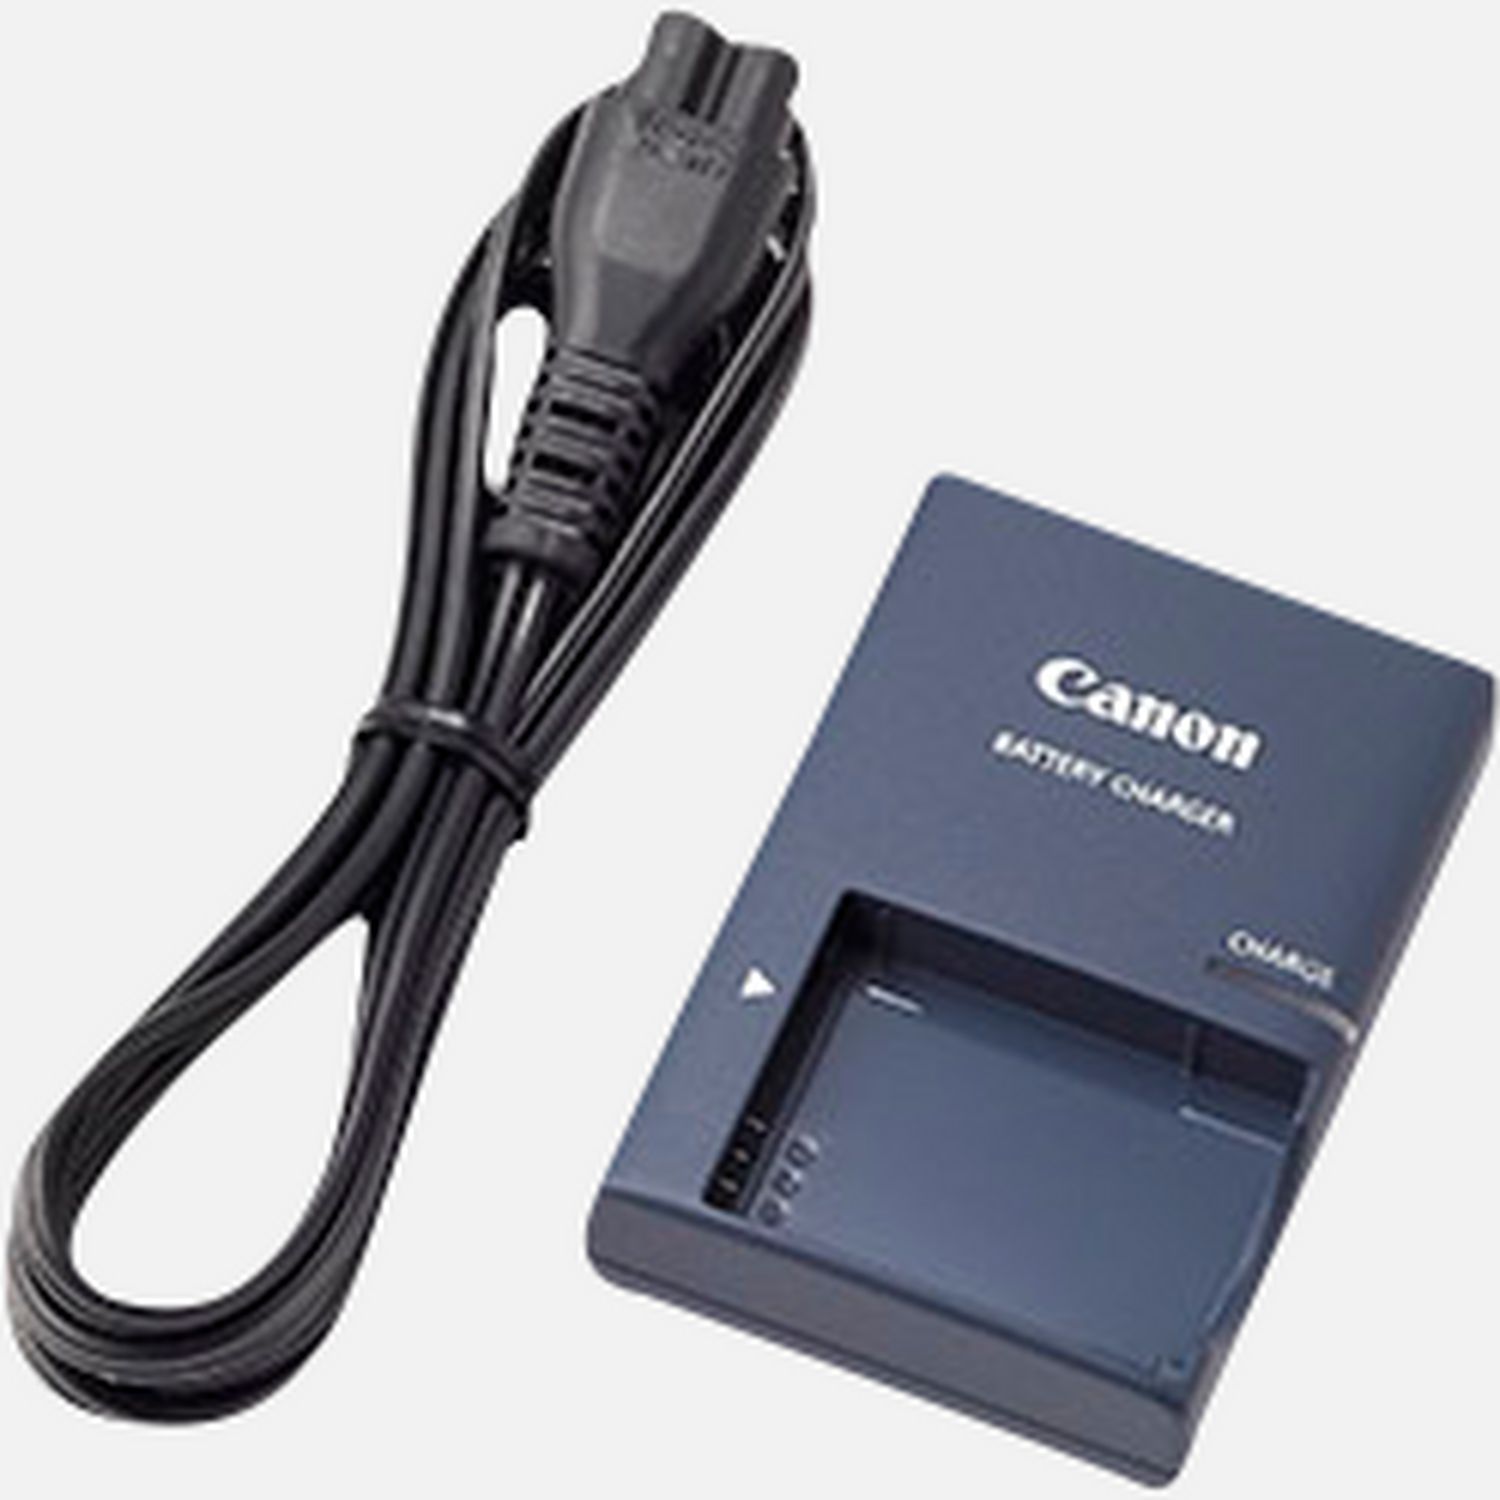 Buy Canon  CB 2LXE Battery Charger   Canon  UK Store